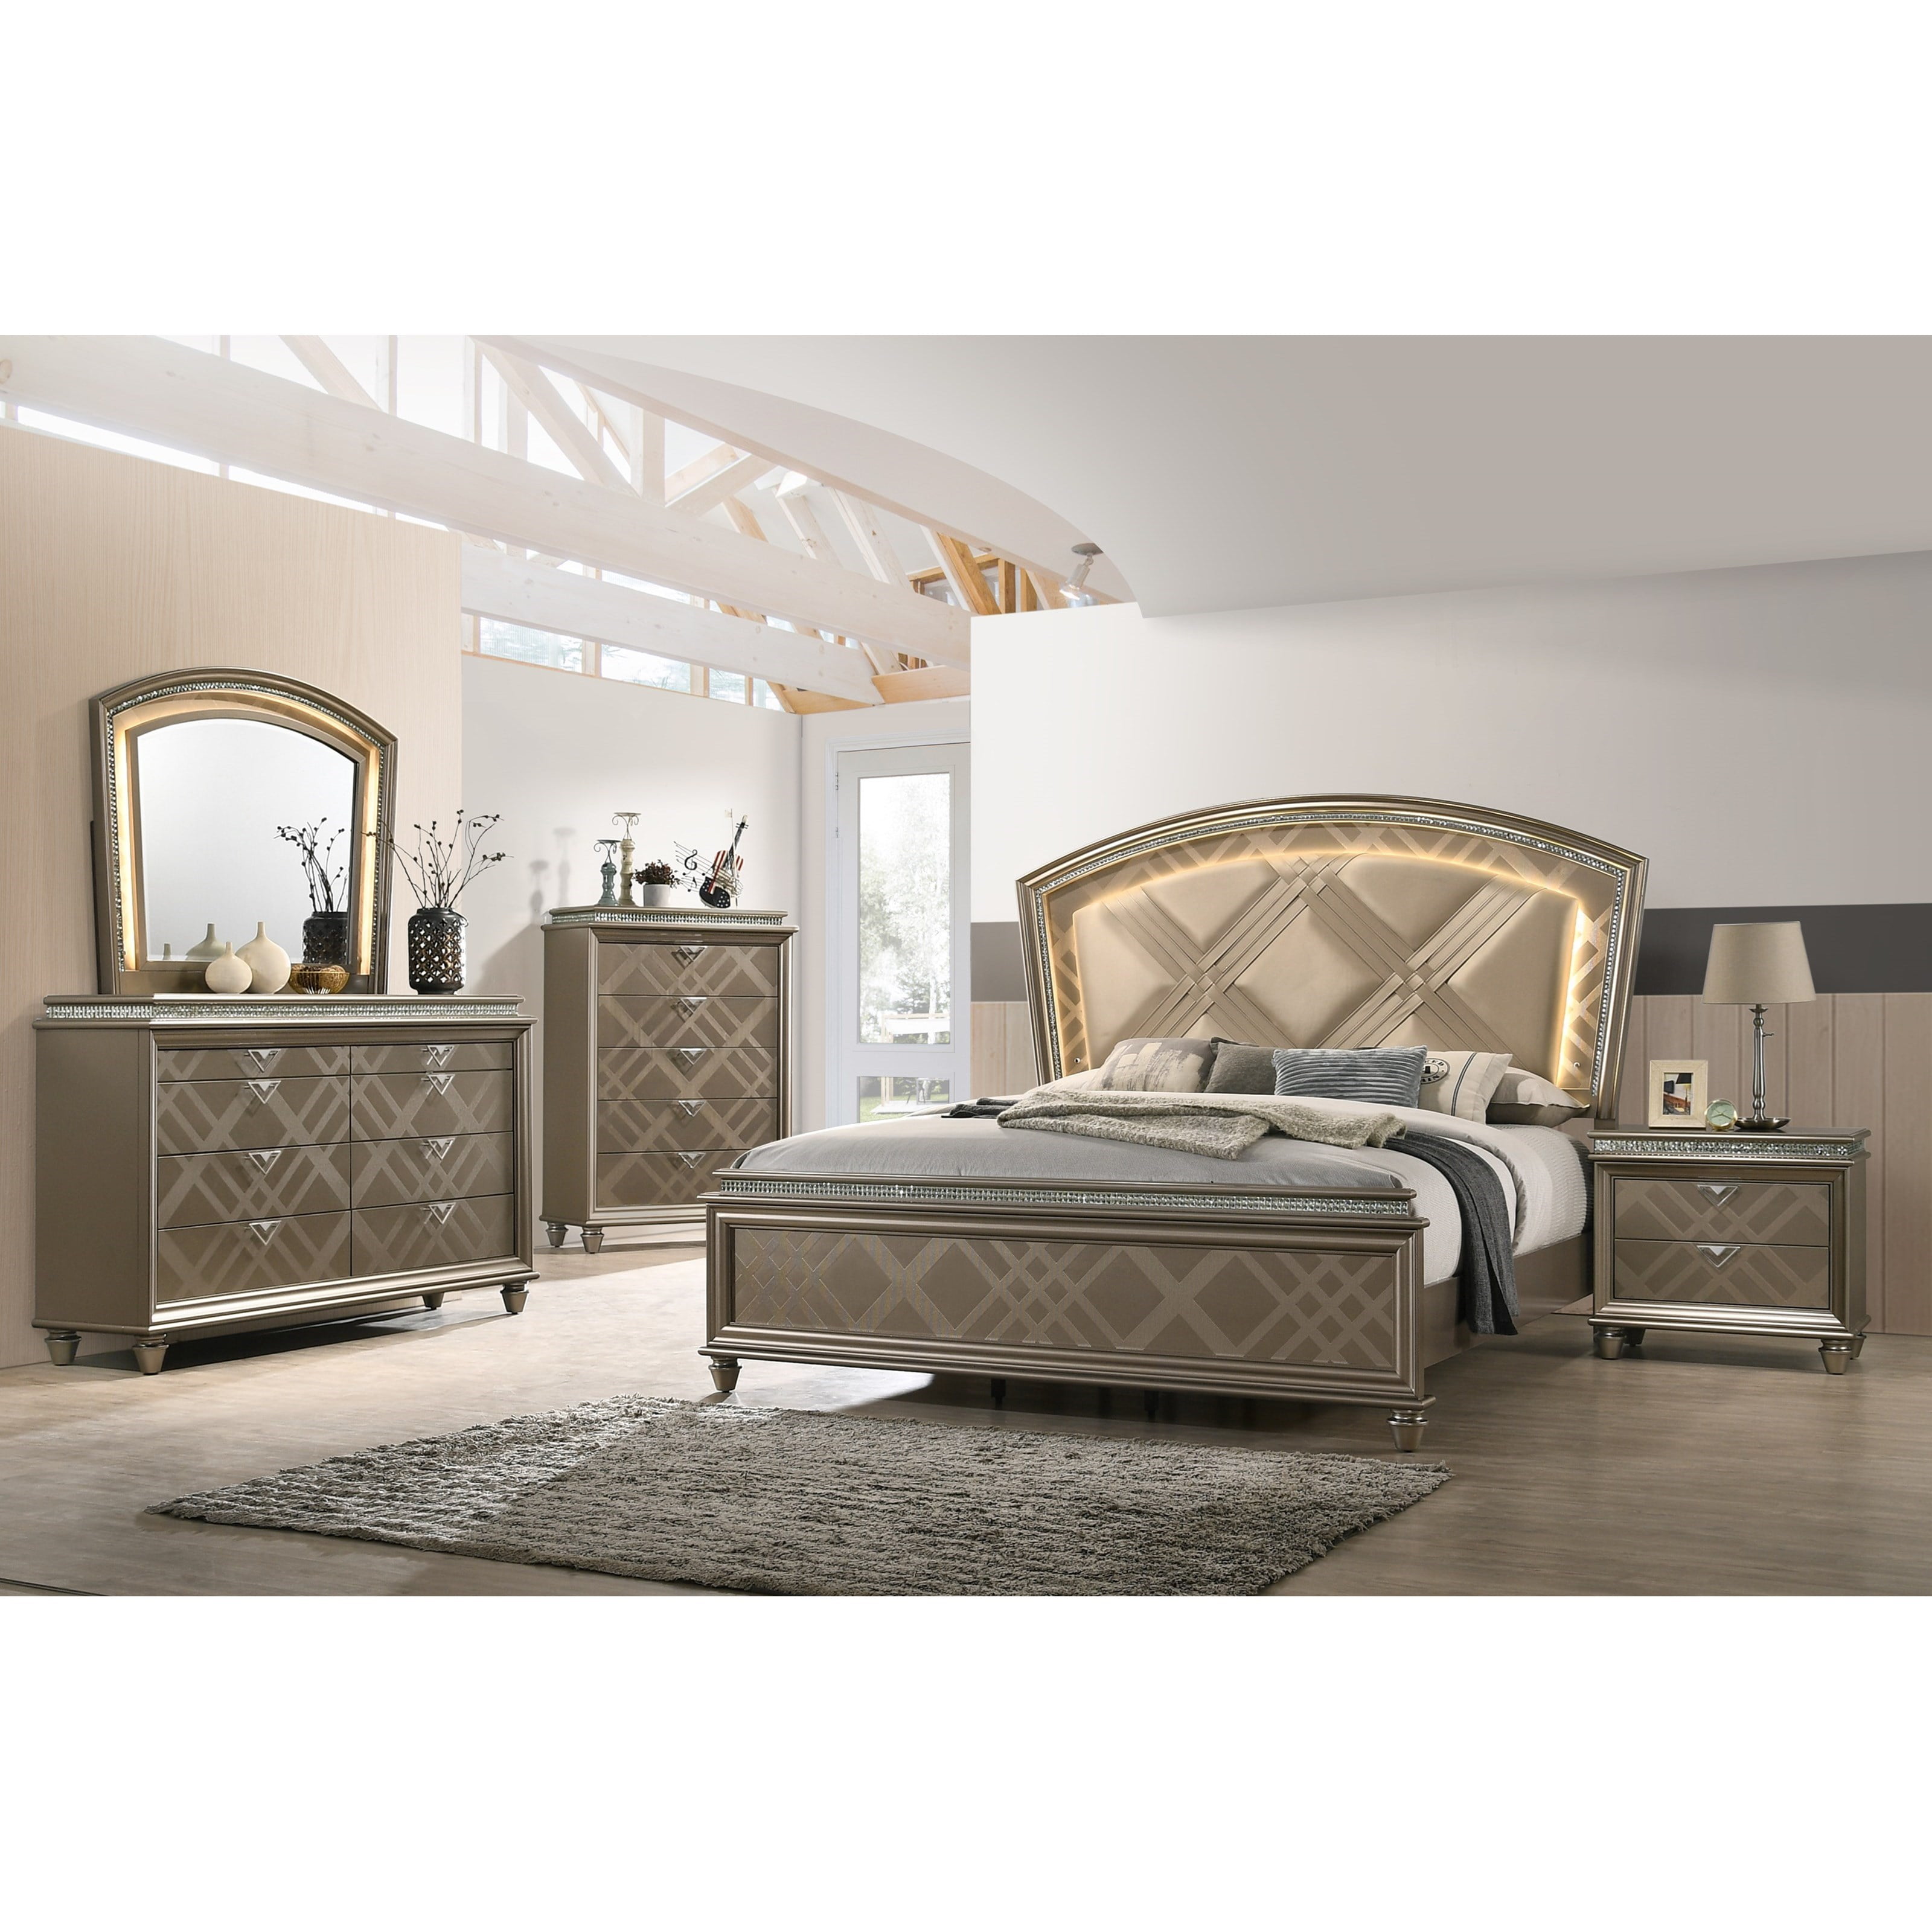 Contemporary 4pc Queen Size Bedroom Set, Queen Size Bed Set With Headboard